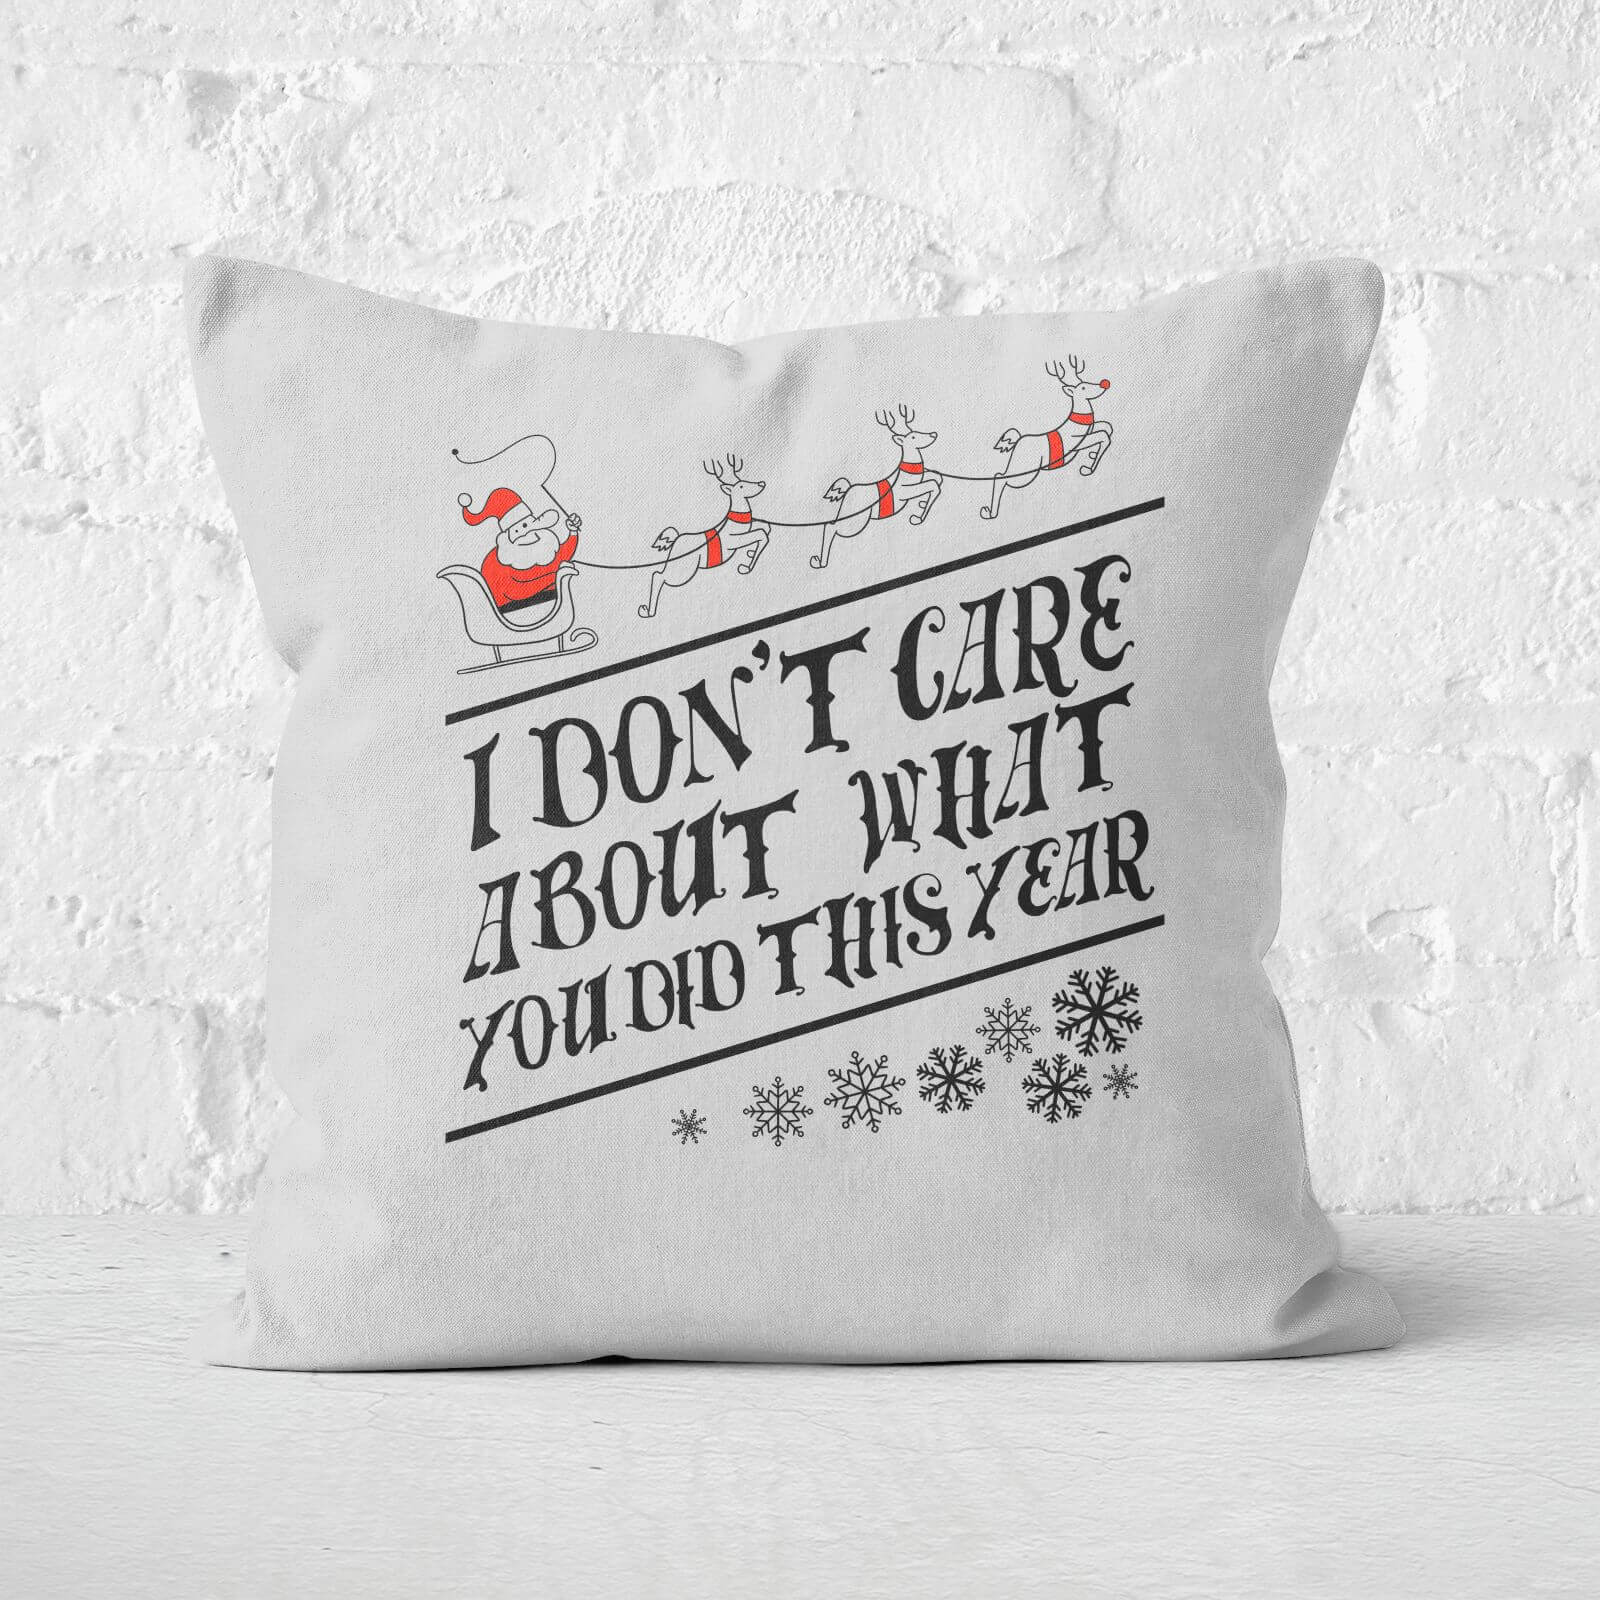 Tobias Fonseca I Dont Care About What You Did This Year Square Cushion - 60x60cm - Soft Touch